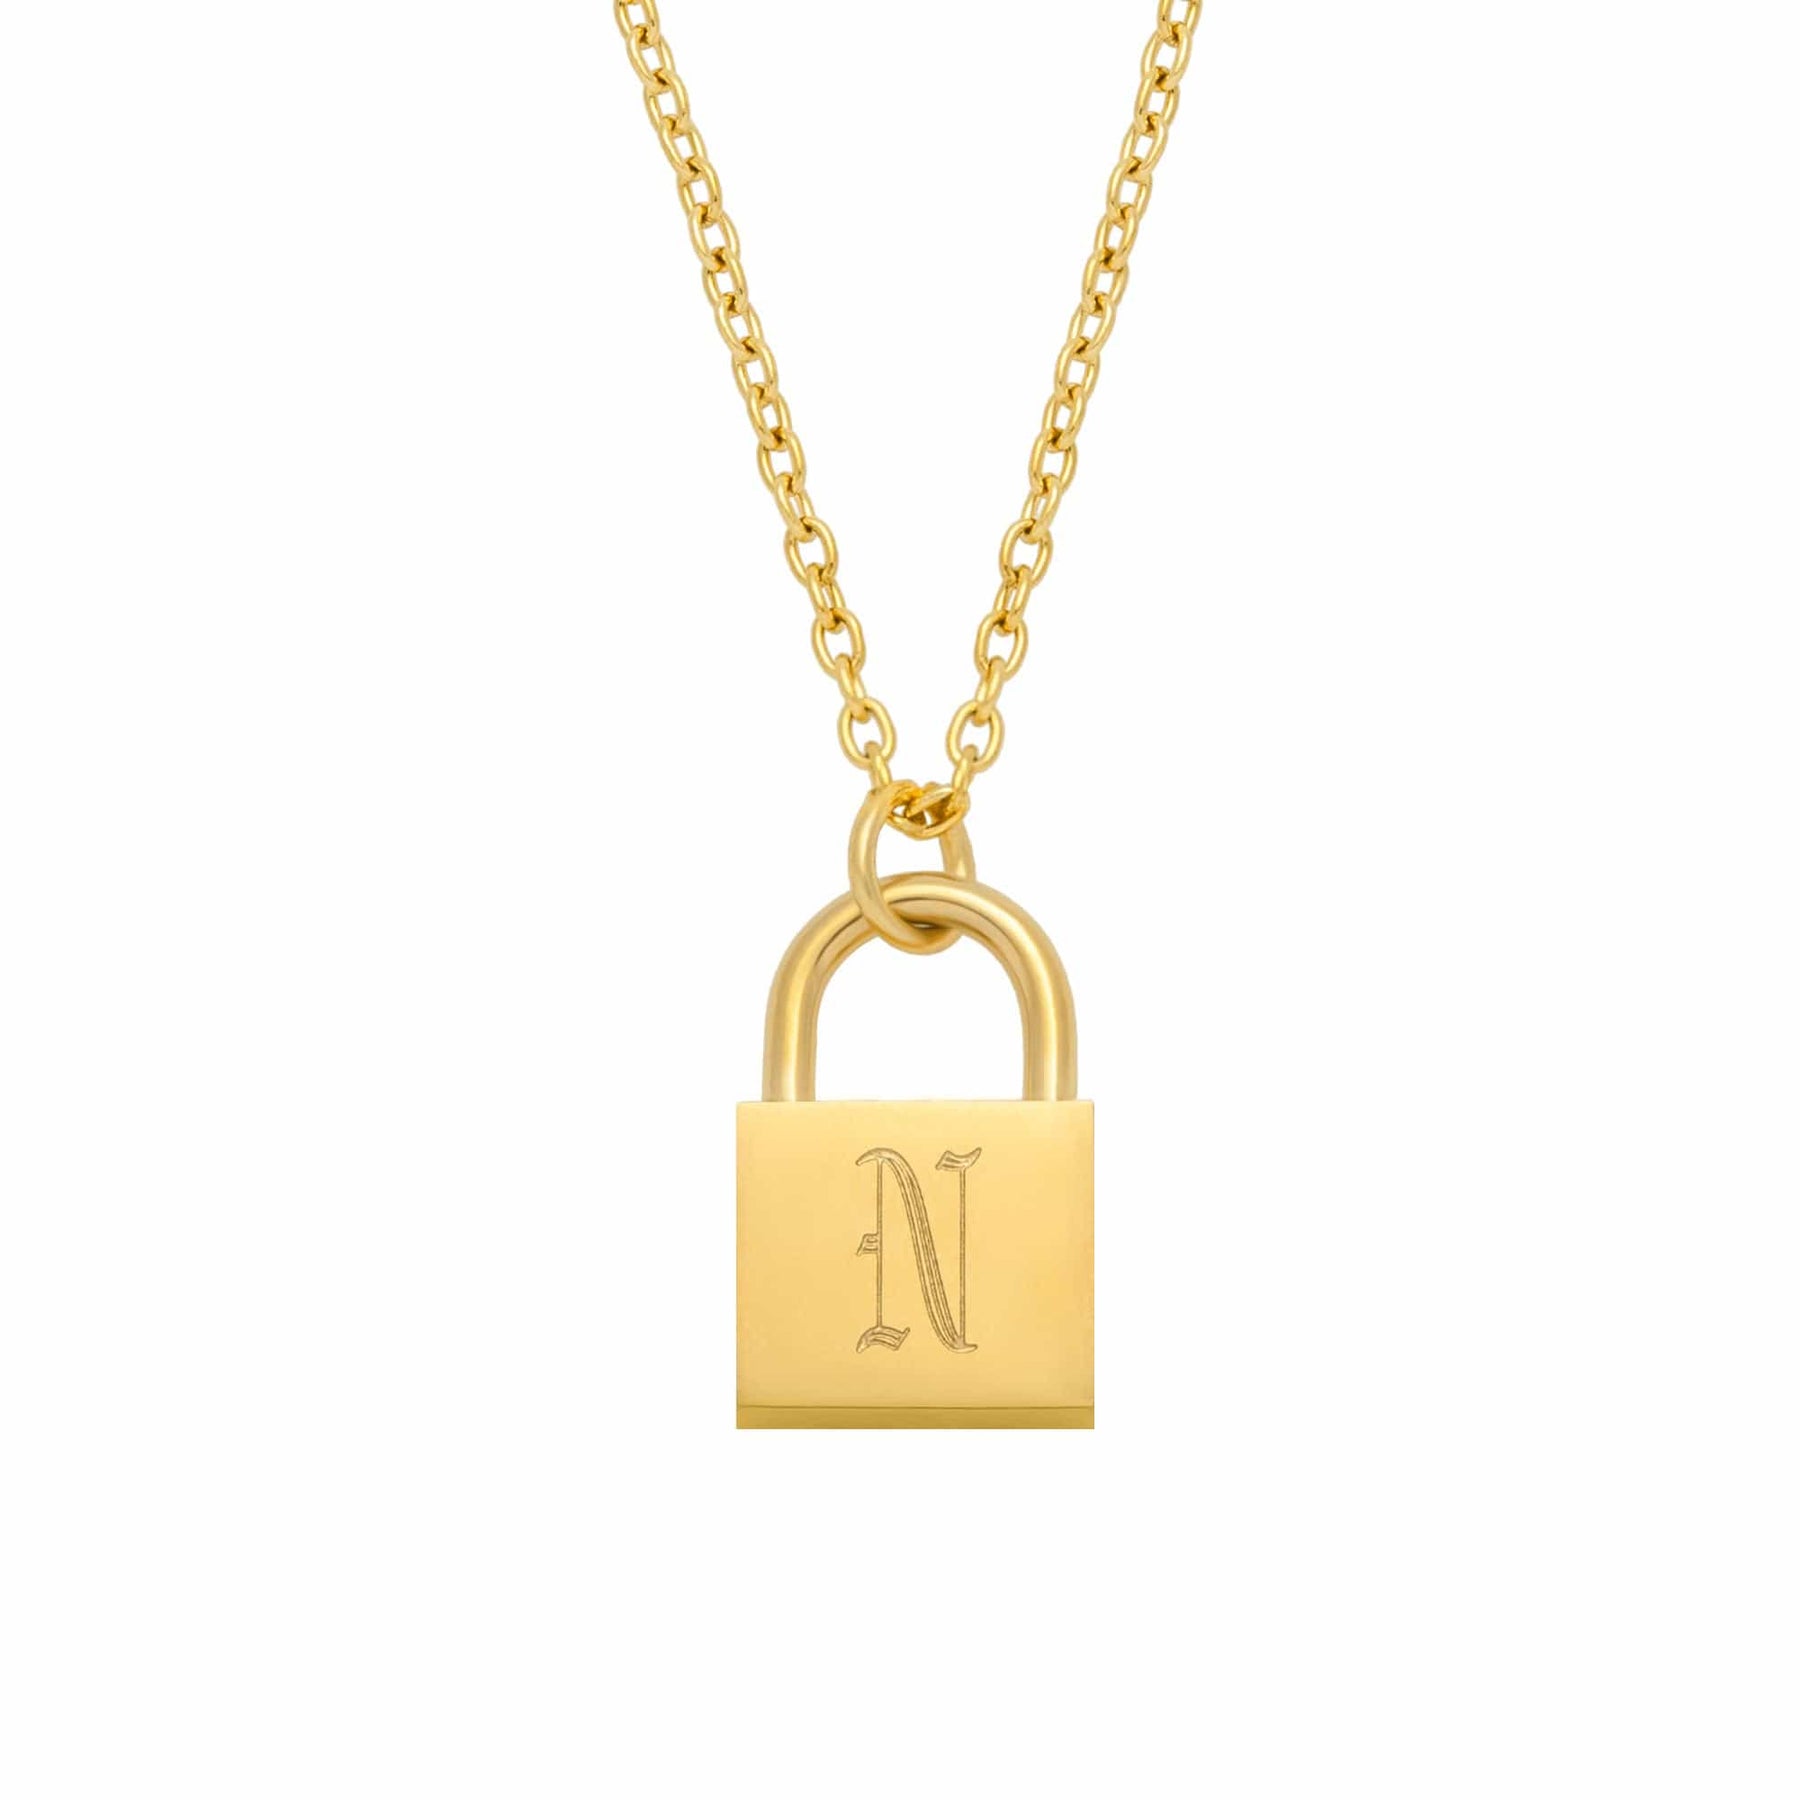 BohoMoon Stainless Steel Padlock Gothic Initial Necklace Gold / A